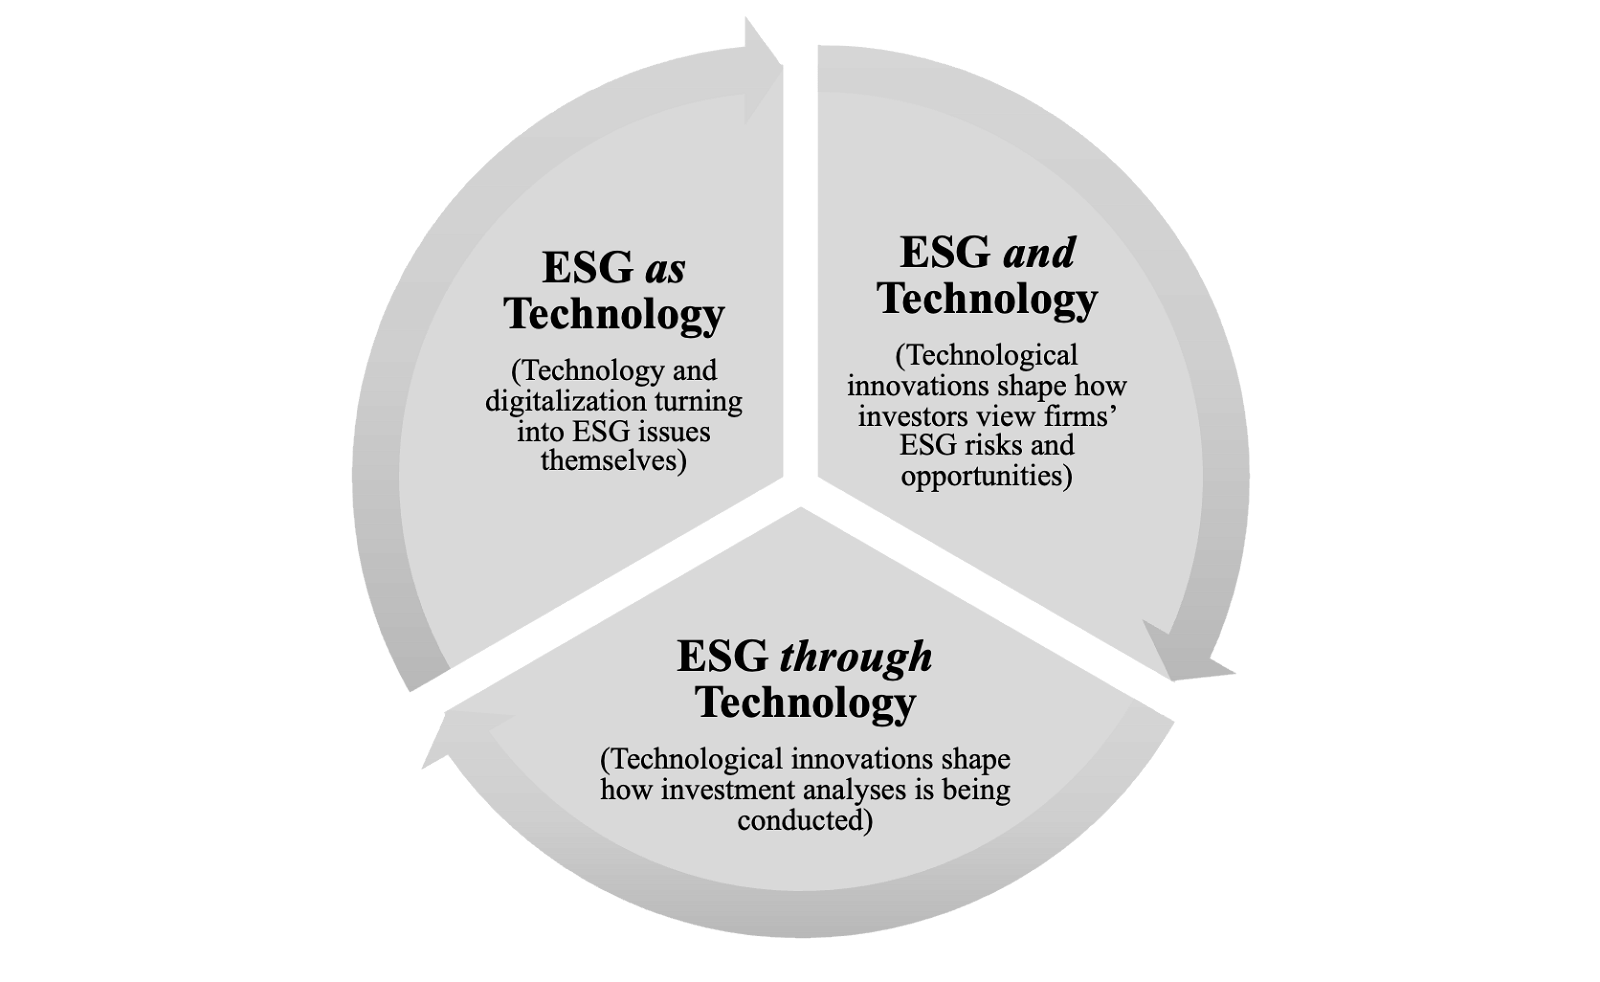 Figure 1.1: Three Perspectives on the Relationship between ESG and Technology